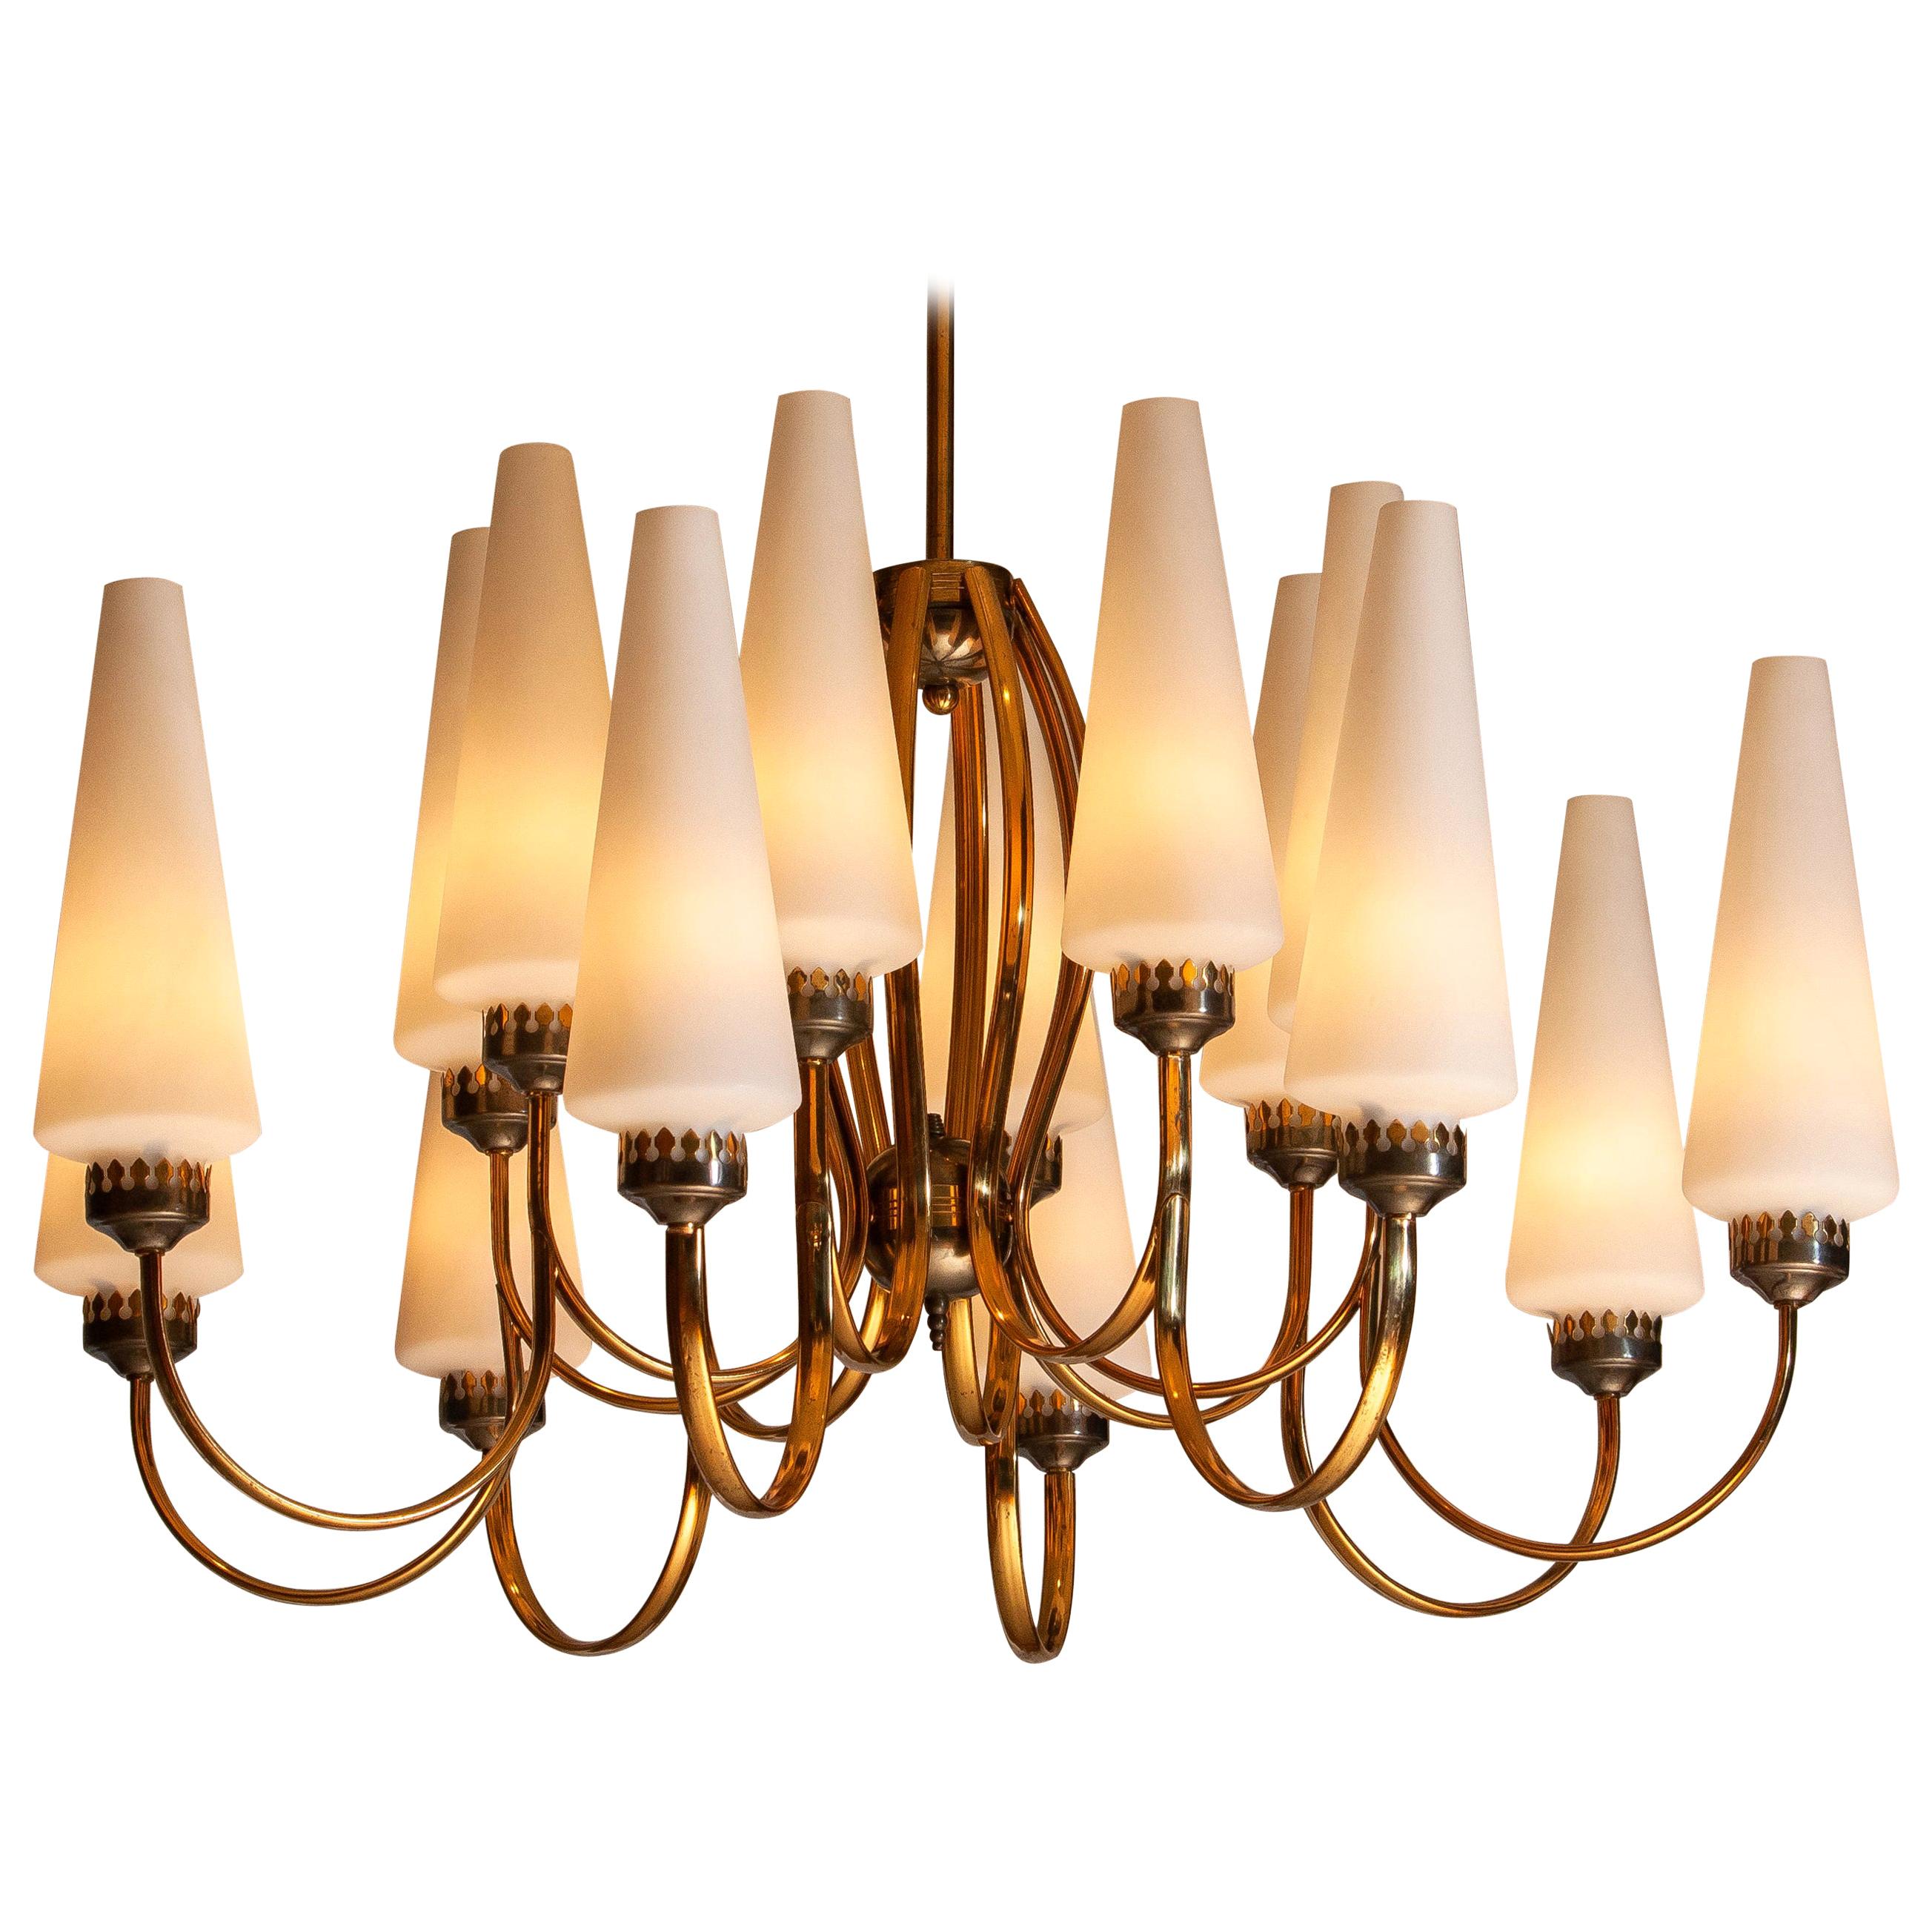 Exceptional big brass extra large chandelier with sixteen big Murano vases made by Stilnovo in the 1950s, Italy.
The diameter of these big chandelier is 90 cm or 36 inches.
The height of the Murano vases is 30 cm or 12 inches.
The total height is